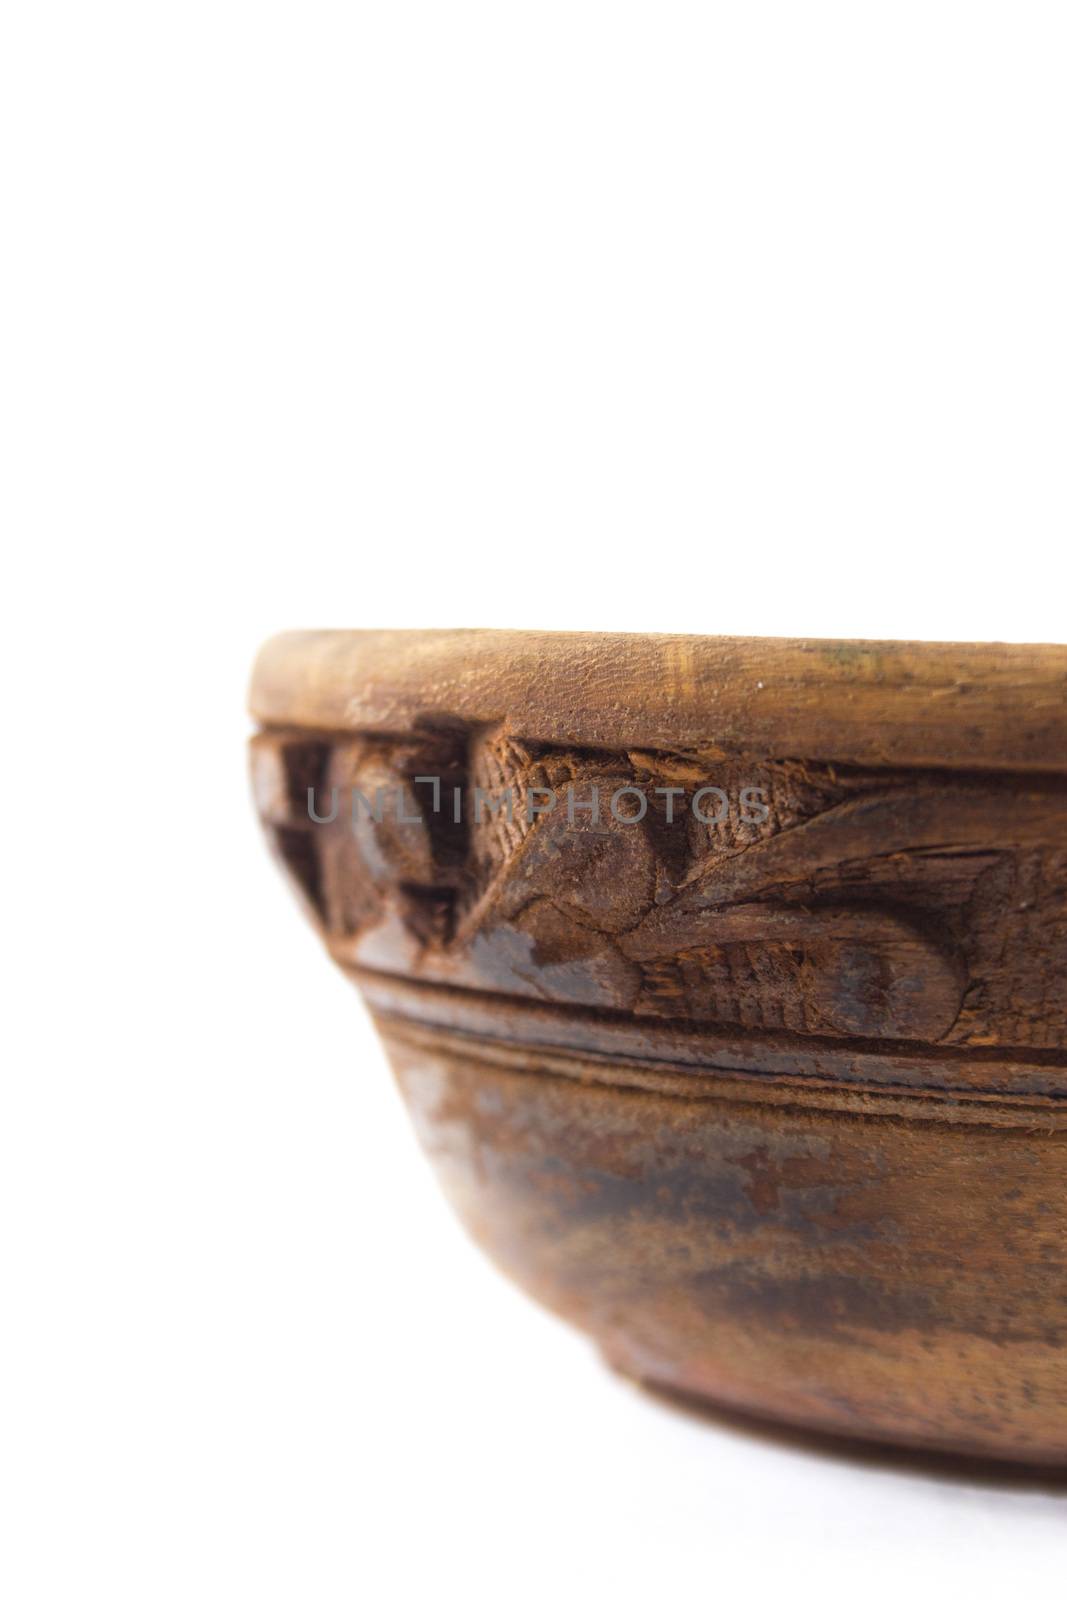 Empty wooden bowl on a white background.